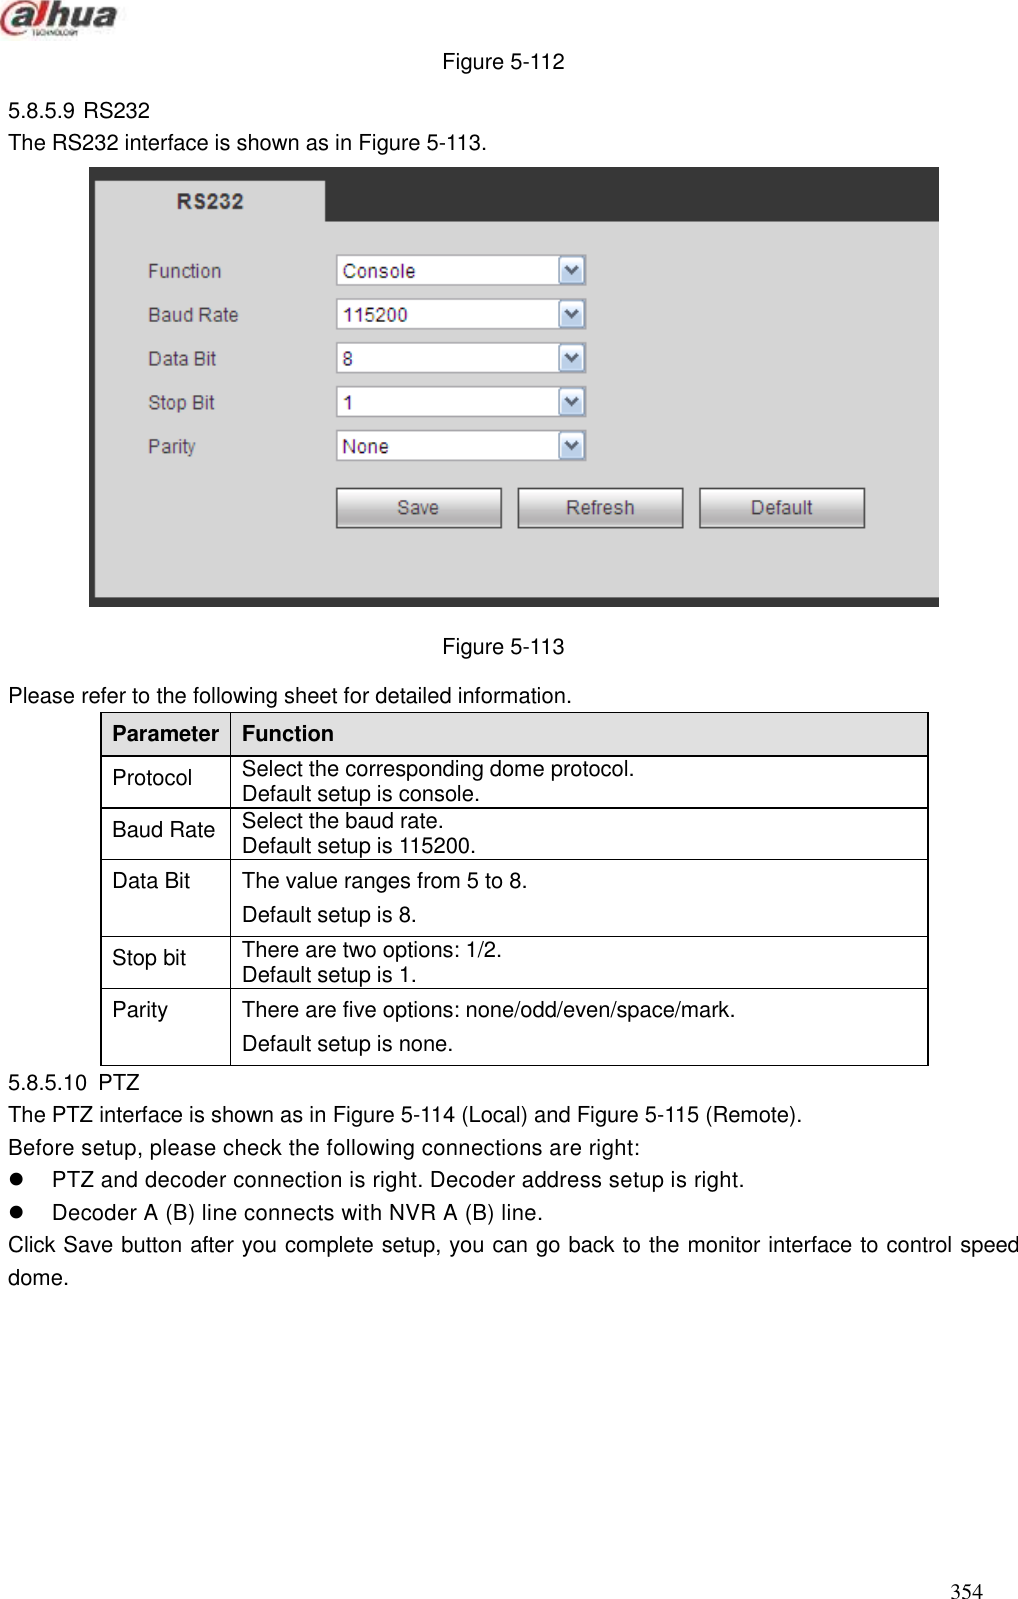  354  Figure 5-112 5.8.5.9 RS232 The RS232 interface is shown as in Figure 5-113.  Figure 5-113 Please refer to the following sheet for detailed information.   Parameter   Function   Protocol Select the corresponding dome protocol. Default setup is console.   Baud Rate Select the baud rate.   Default setup is 115200. Data Bit   The value ranges from 5 to 8.   Default setup is 8. Stop bit   There are two options: 1/2.   Default setup is 1. Parity   There are five options: none/odd/even/space/mark. Default setup is none.   5.8.5.10  PTZ   The PTZ interface is shown as in Figure 5-114 (Local) and Figure 5-115 (Remote). Before setup, please check the following connections are right:   PTZ and decoder connection is right. Decoder address setup is right.   Decoder A (B) line connects with NVR A (B) line. Click Save button after you complete setup, you can go back to the monitor interface to control speed dome.   